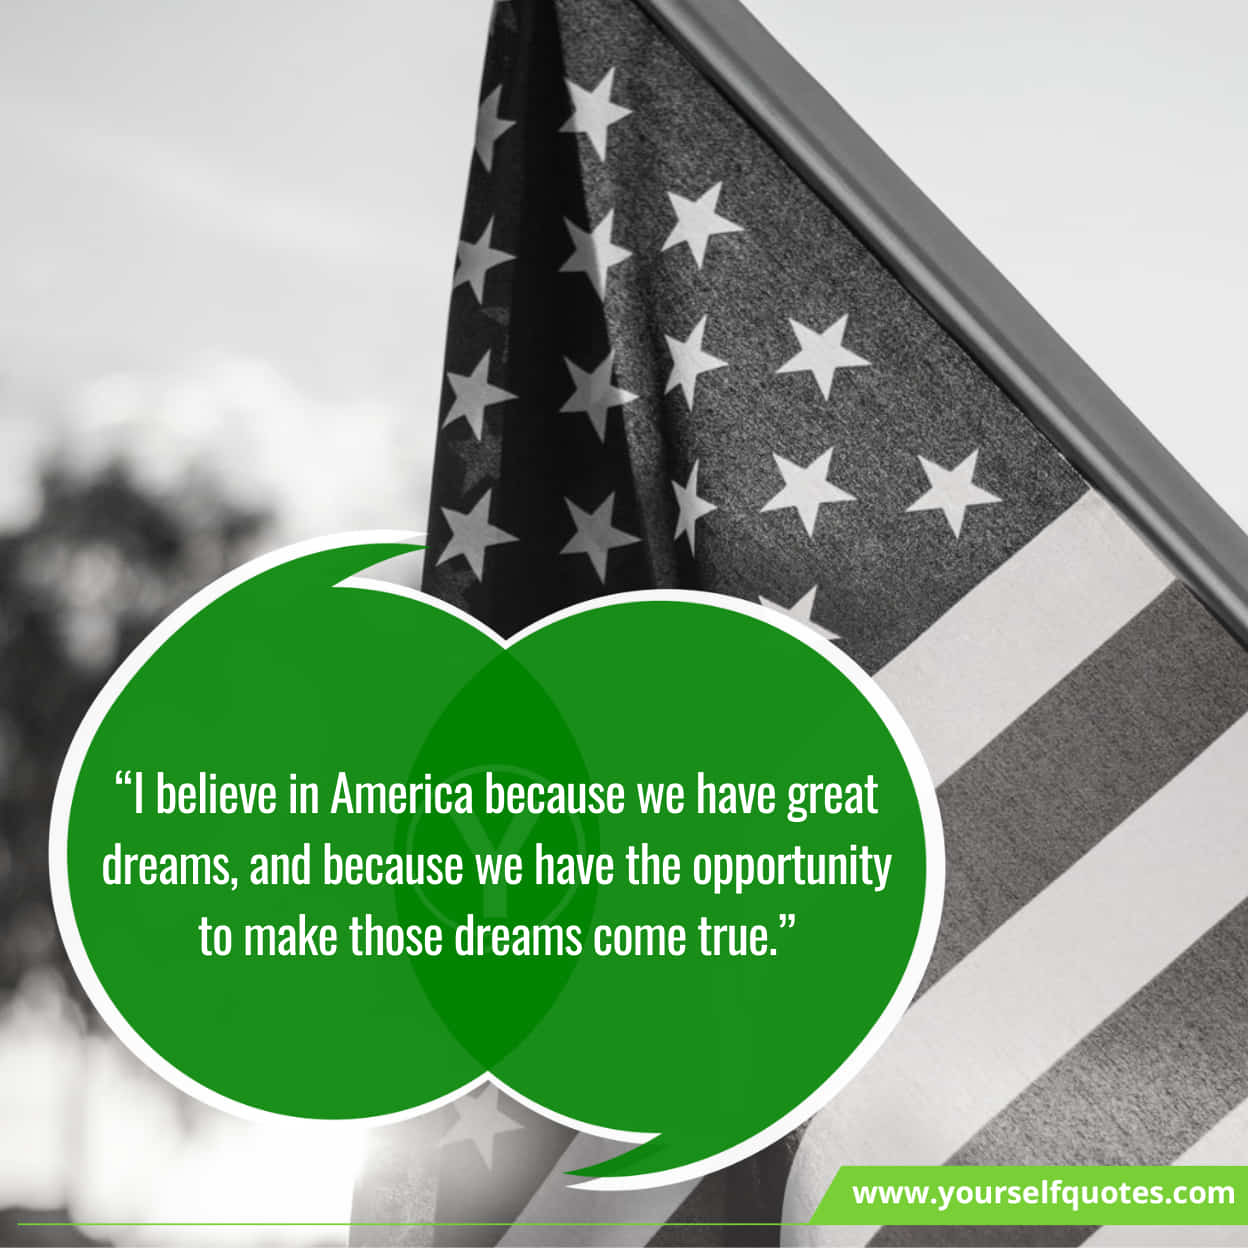 USA Independence Day Inspiring Quotes